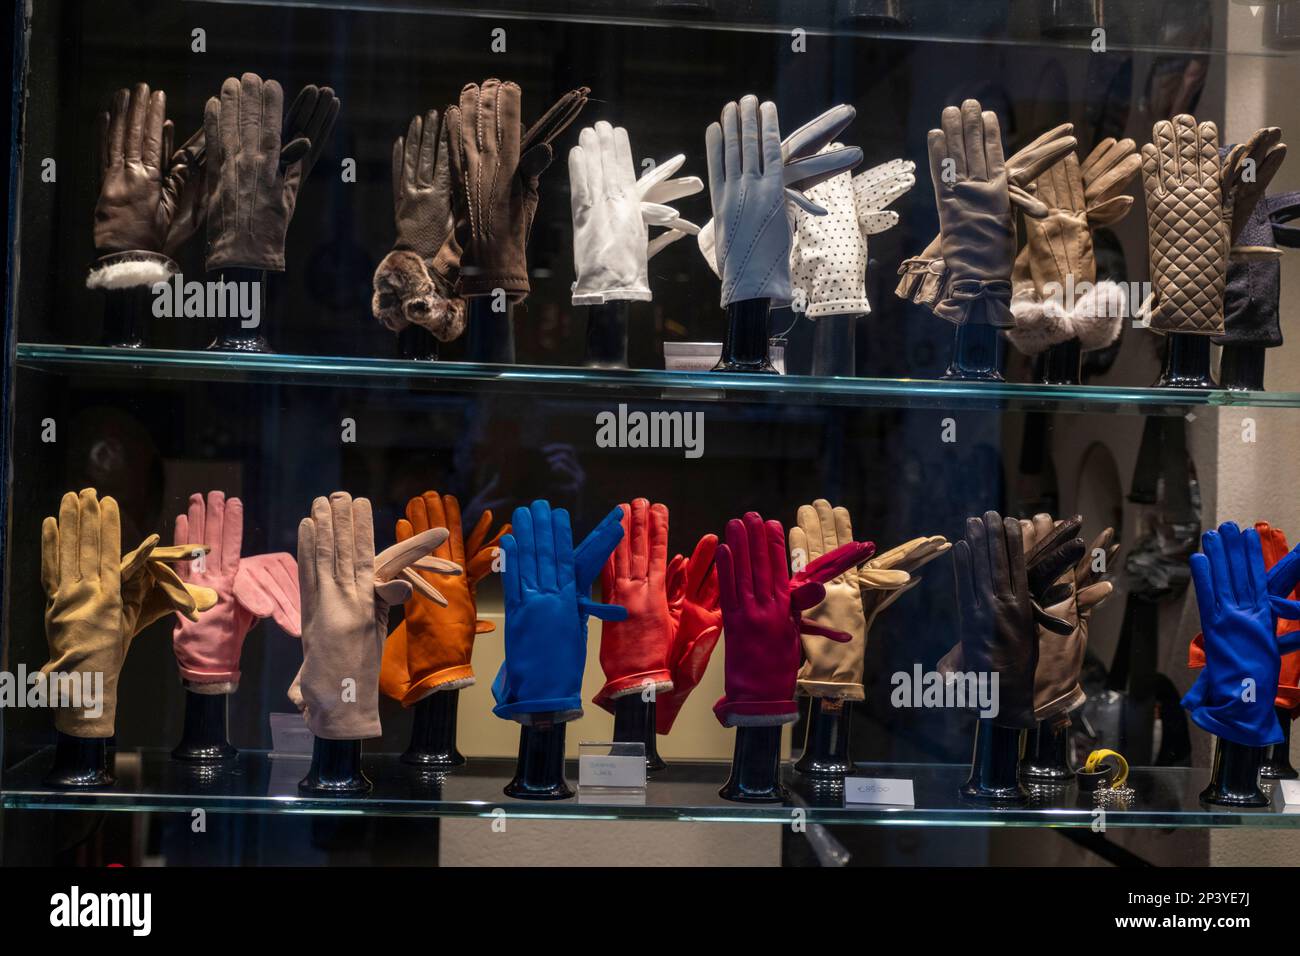 Leather gloves in a shop window, Venice, italy Stock Photo